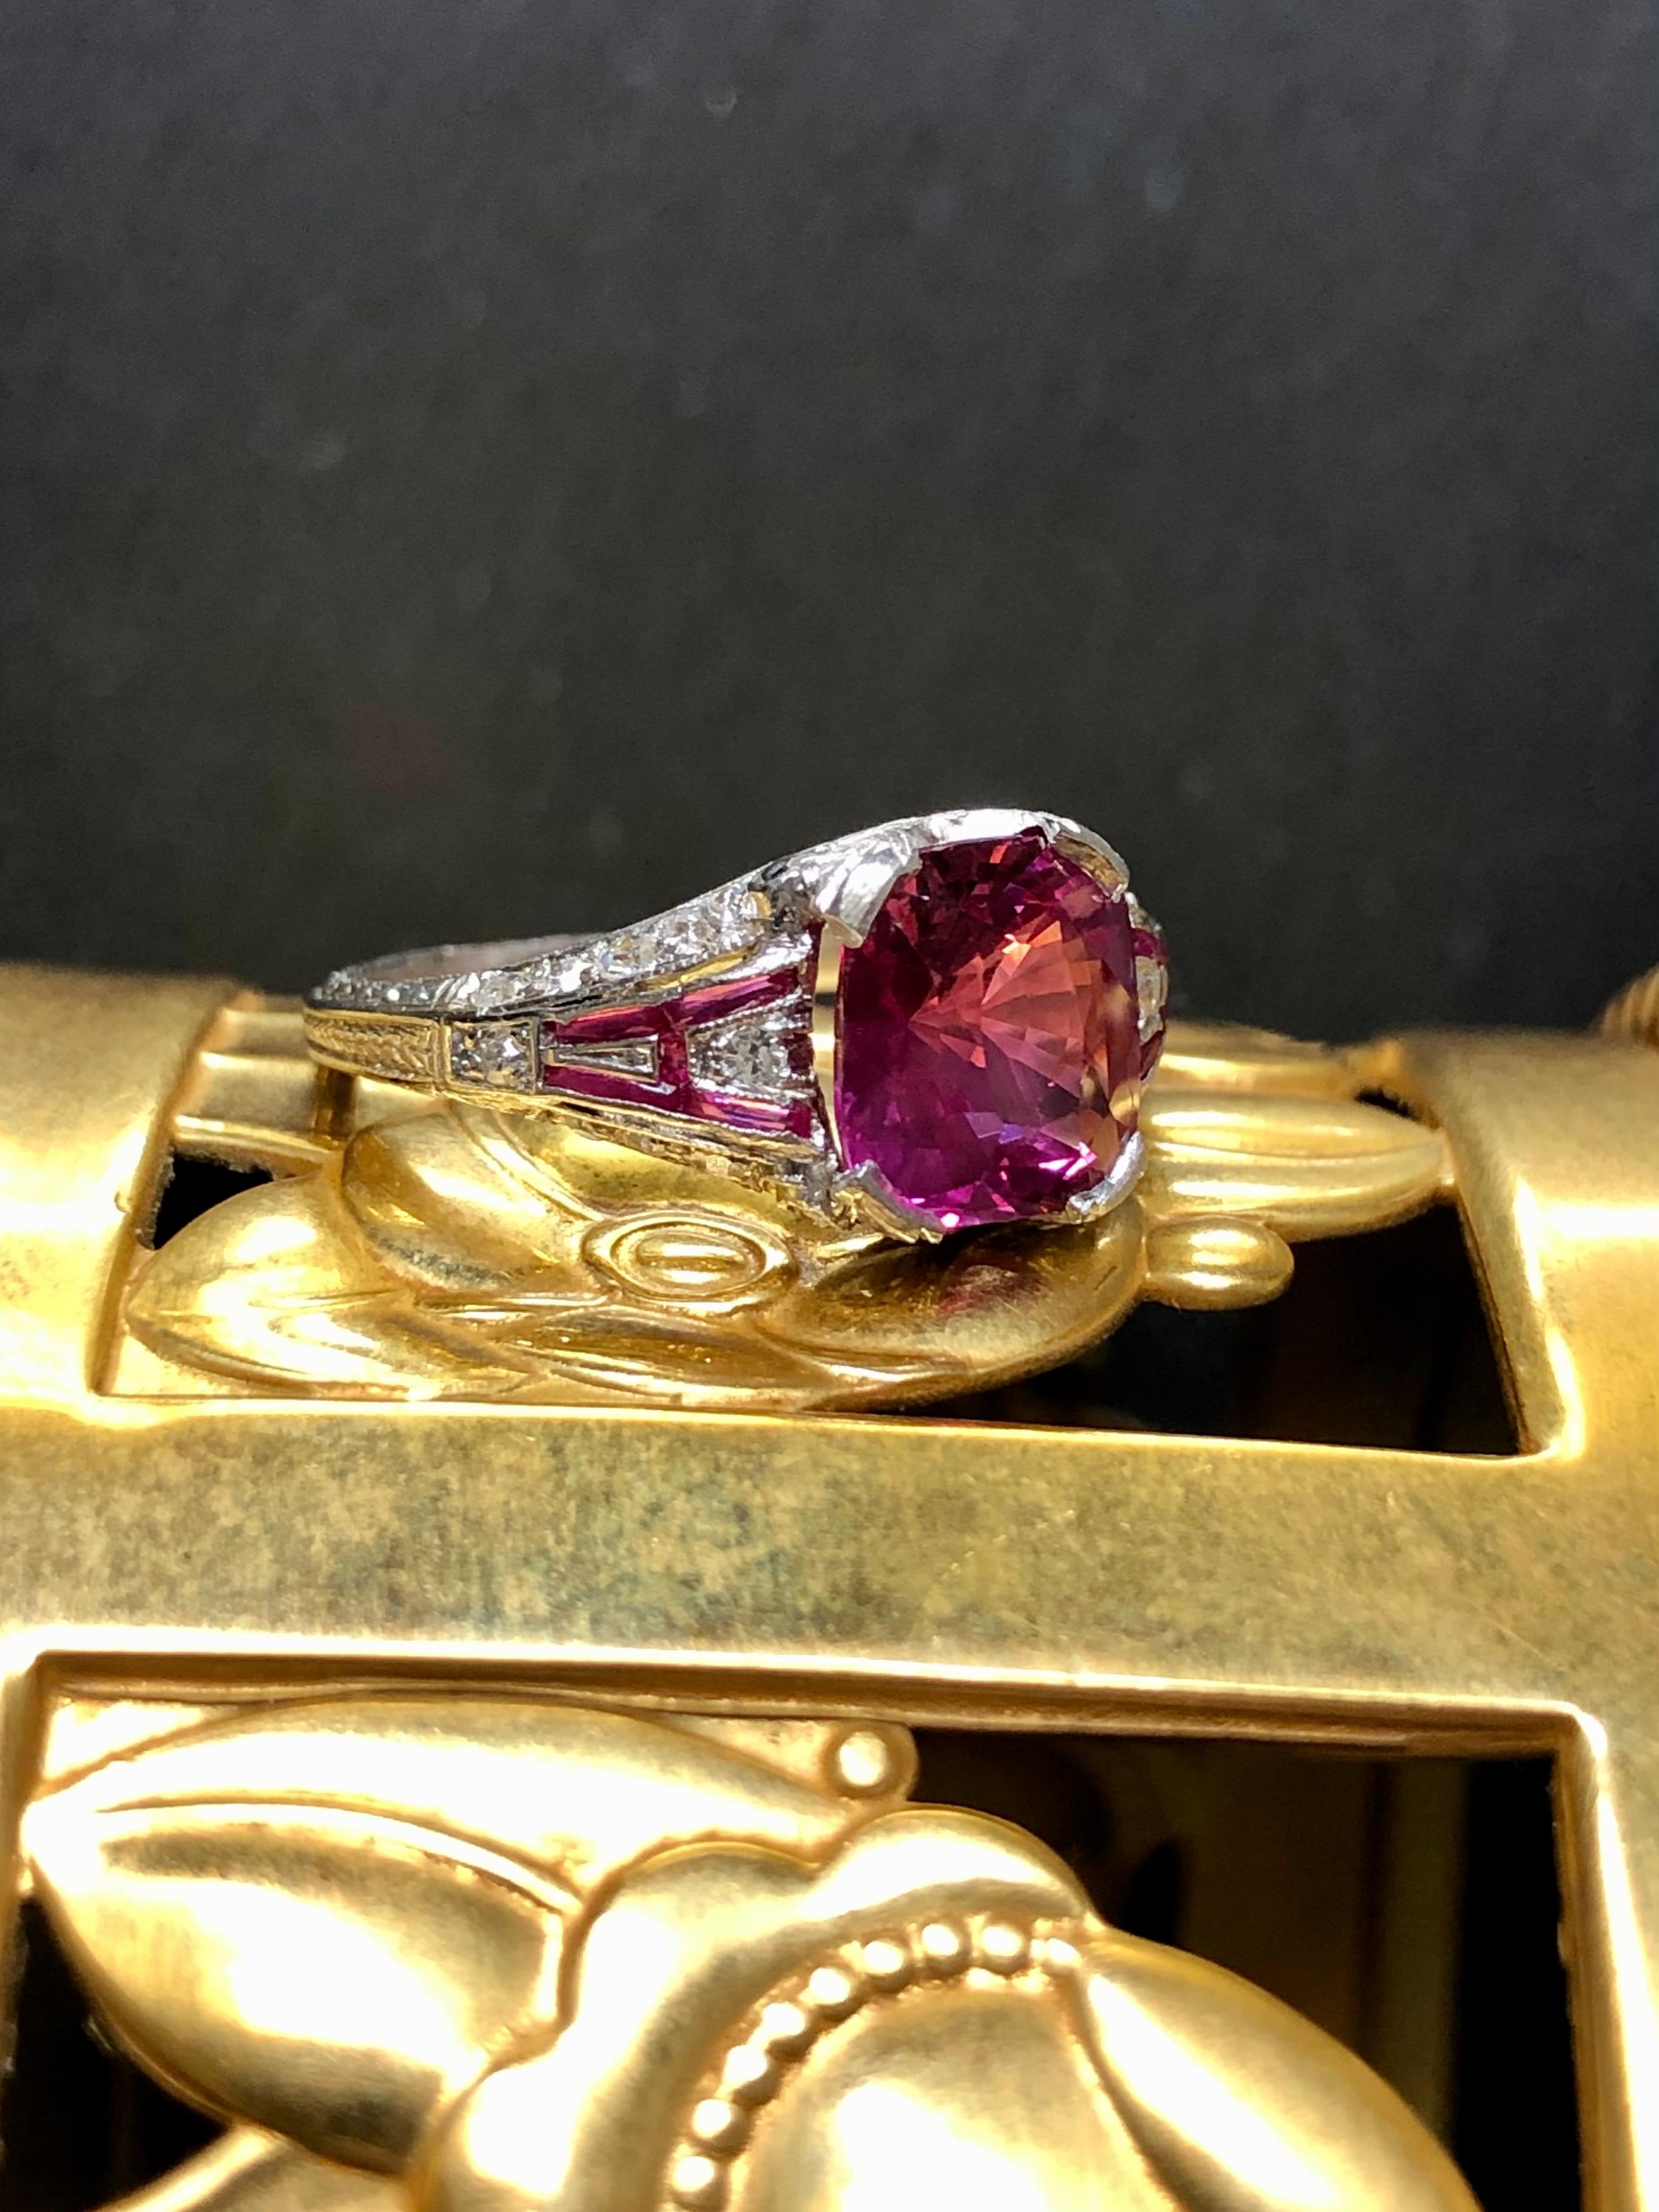 An absolutely stunning ring and unlike anything we have ever owned. The center stone is a 2.53ct NO HEAT pink sapphire exhibiting exceptional color and is 100% eye clean only showing needles when you rock the stone under magnification. That may be